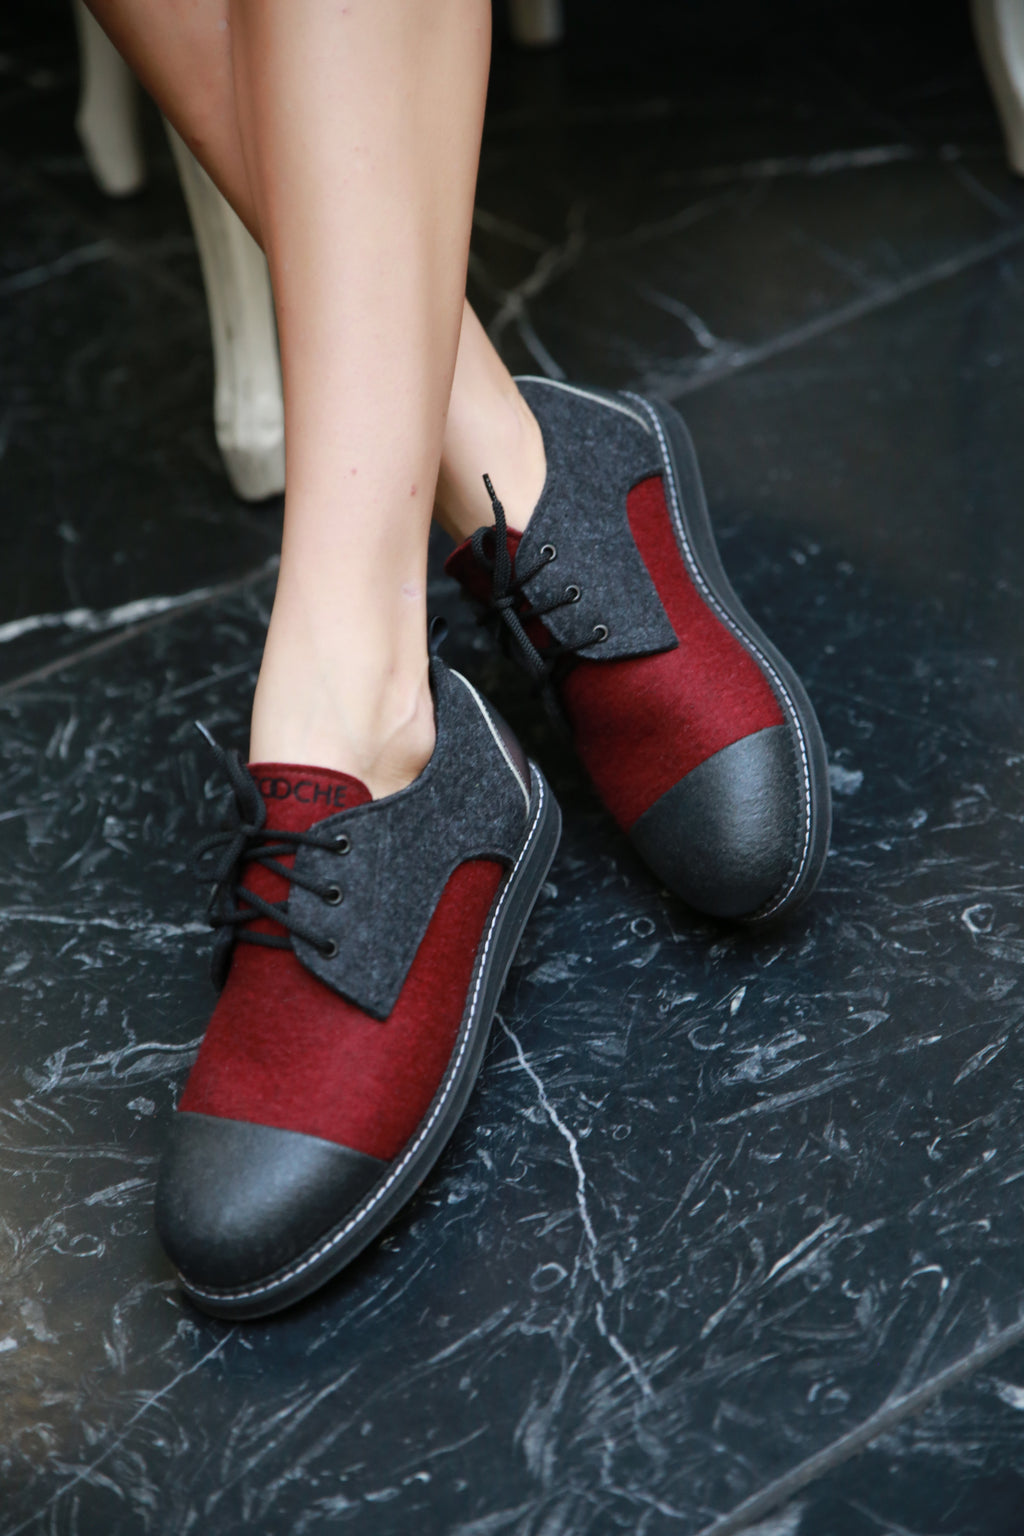 Red wine shoes